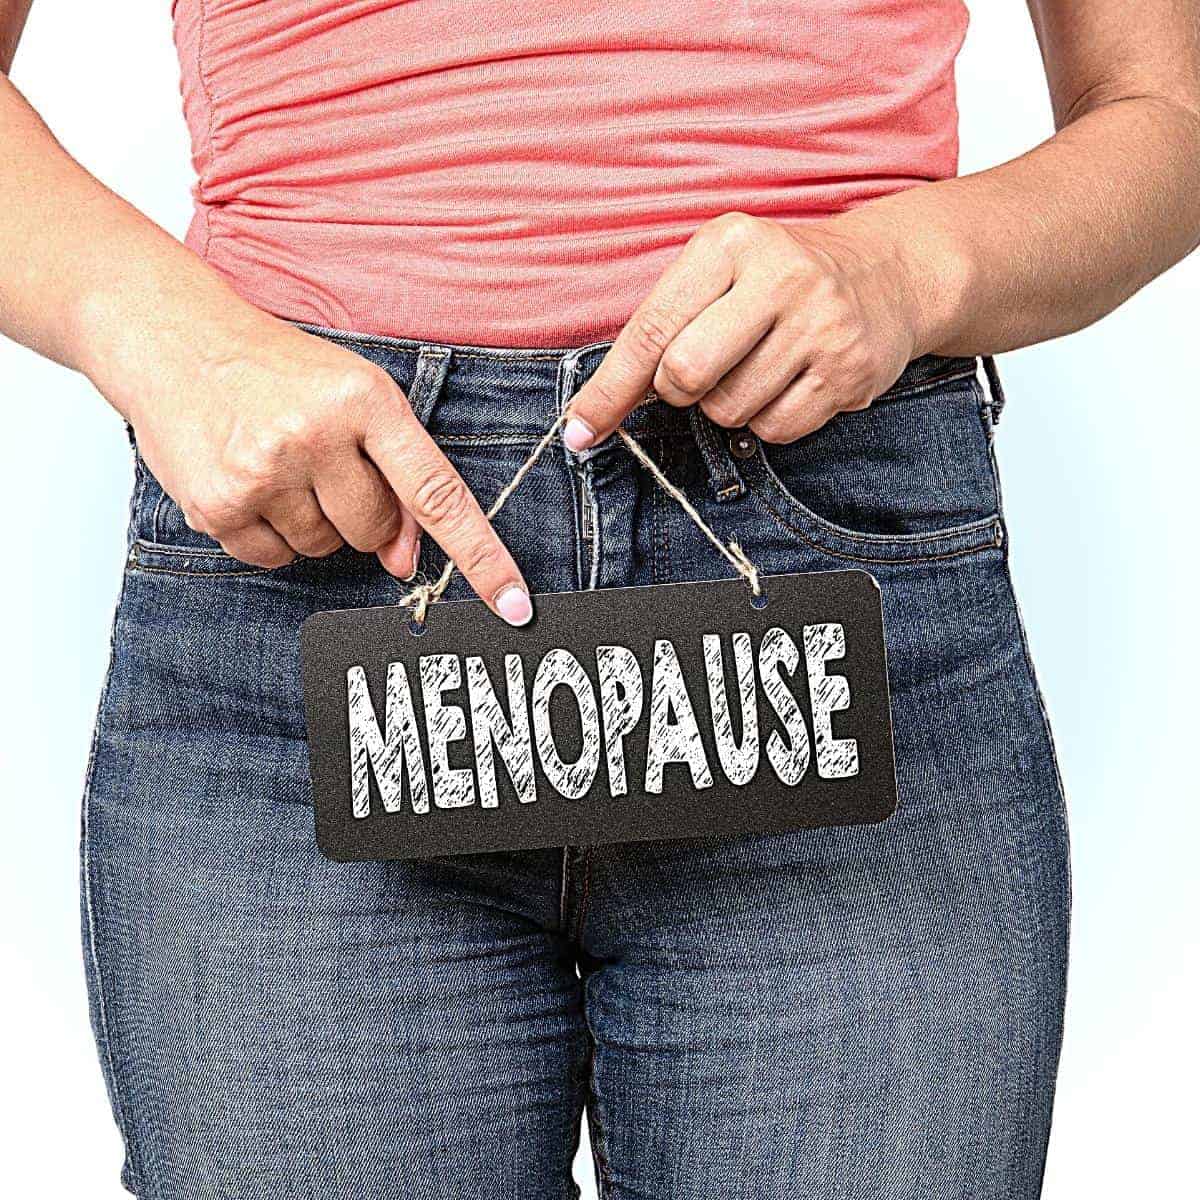 Menopause weight loss guide – all you need to know